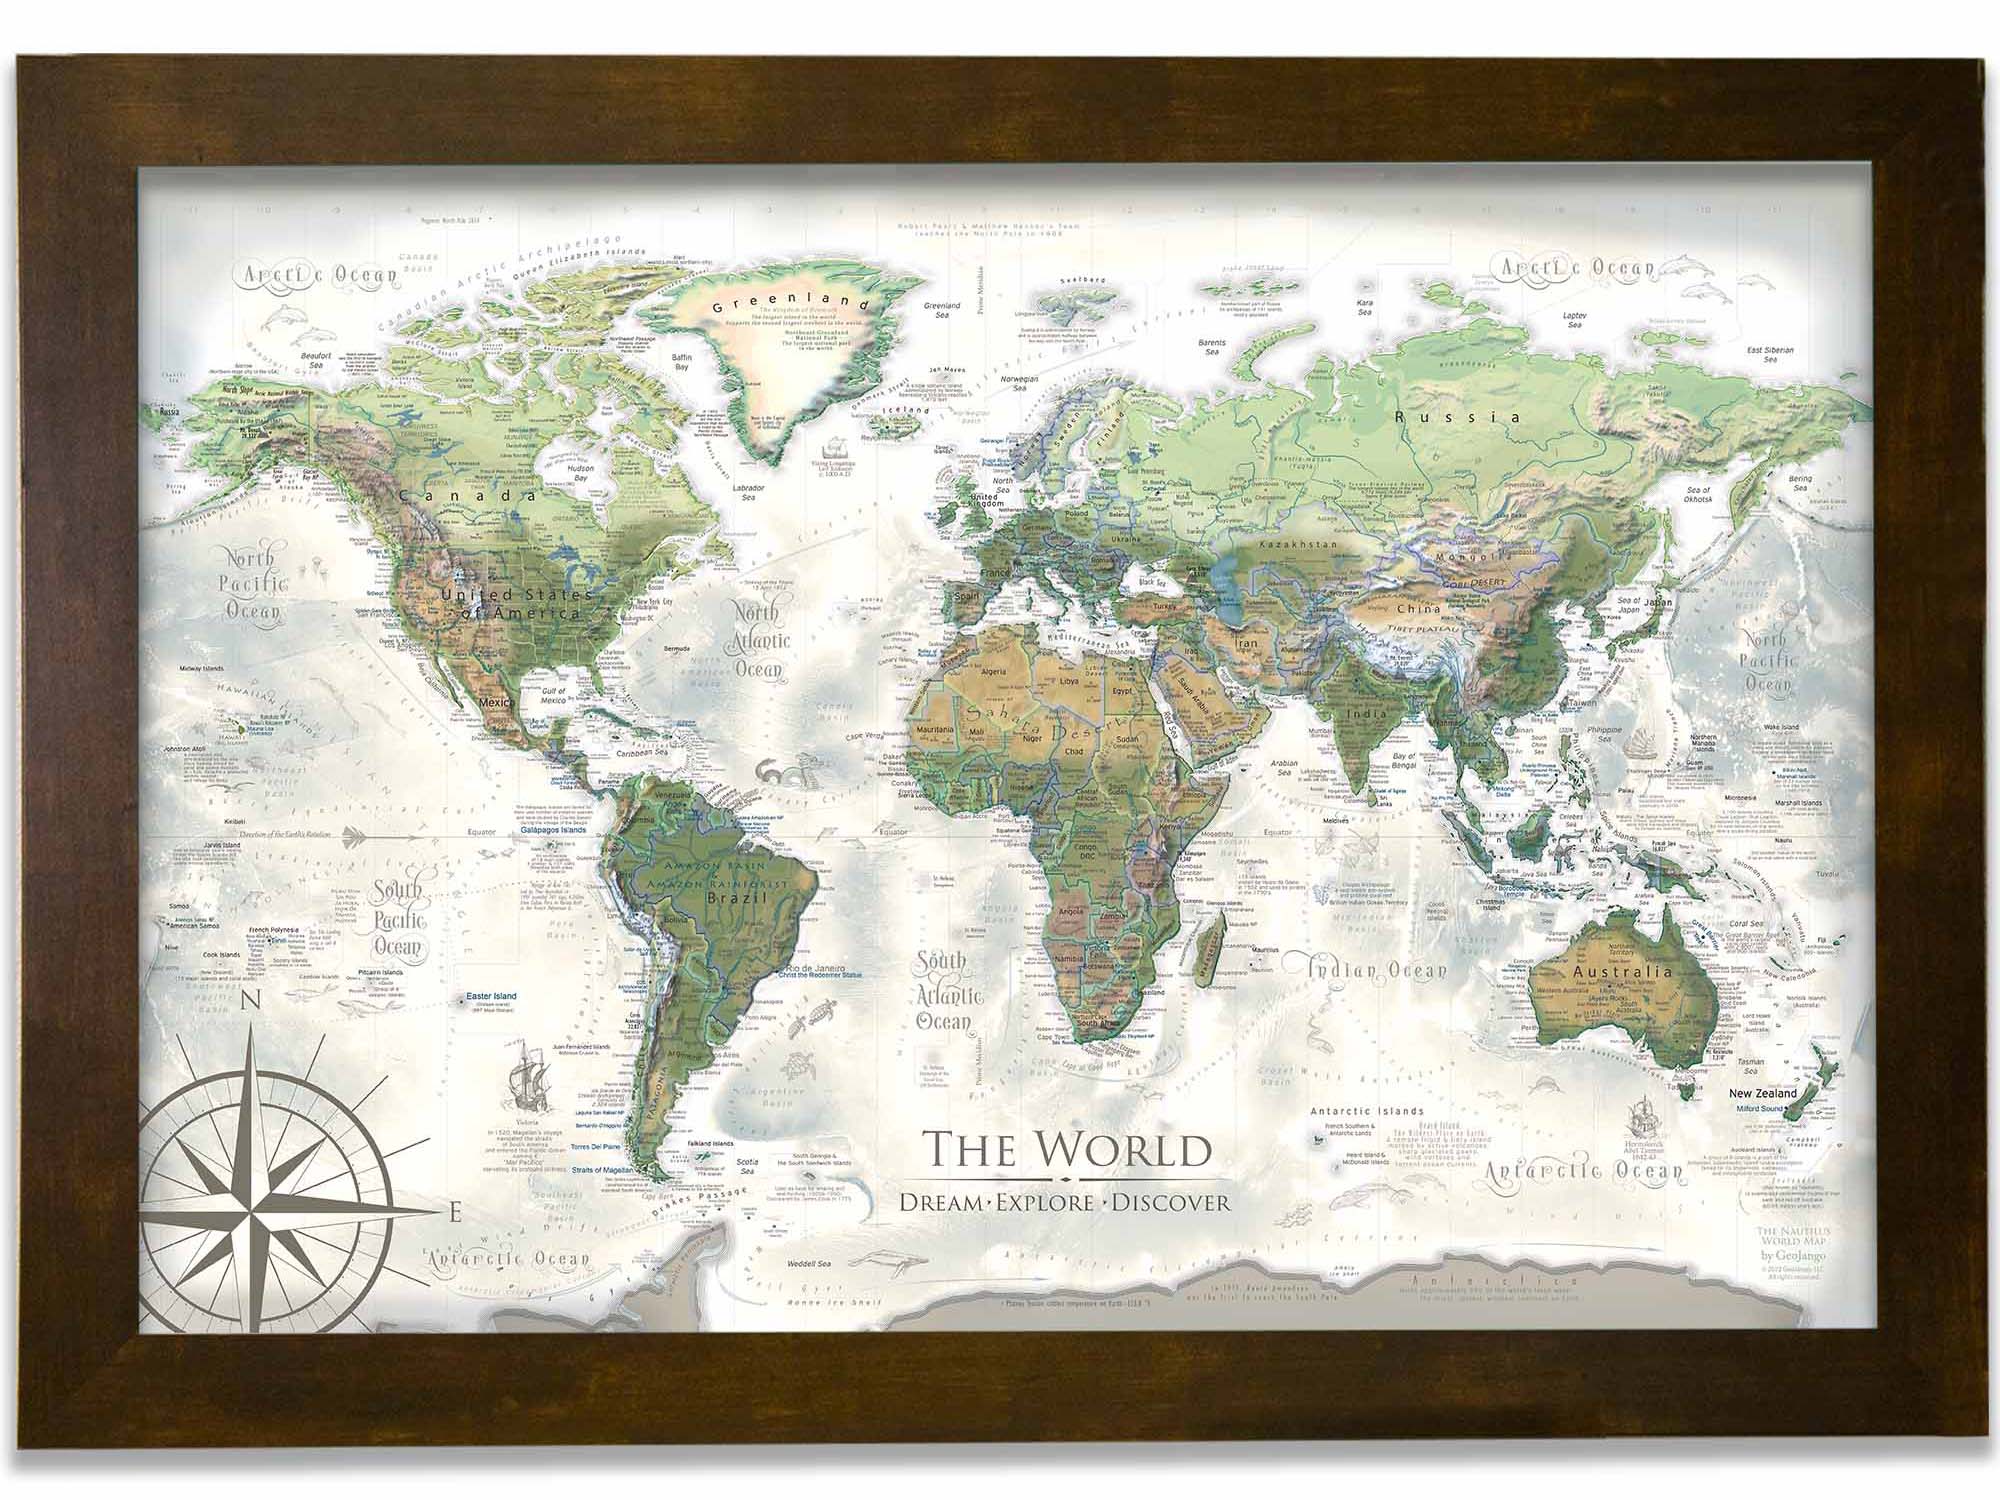 COLONIAL & WORLD TRAFFIC MAP. Antique big size map. 1898